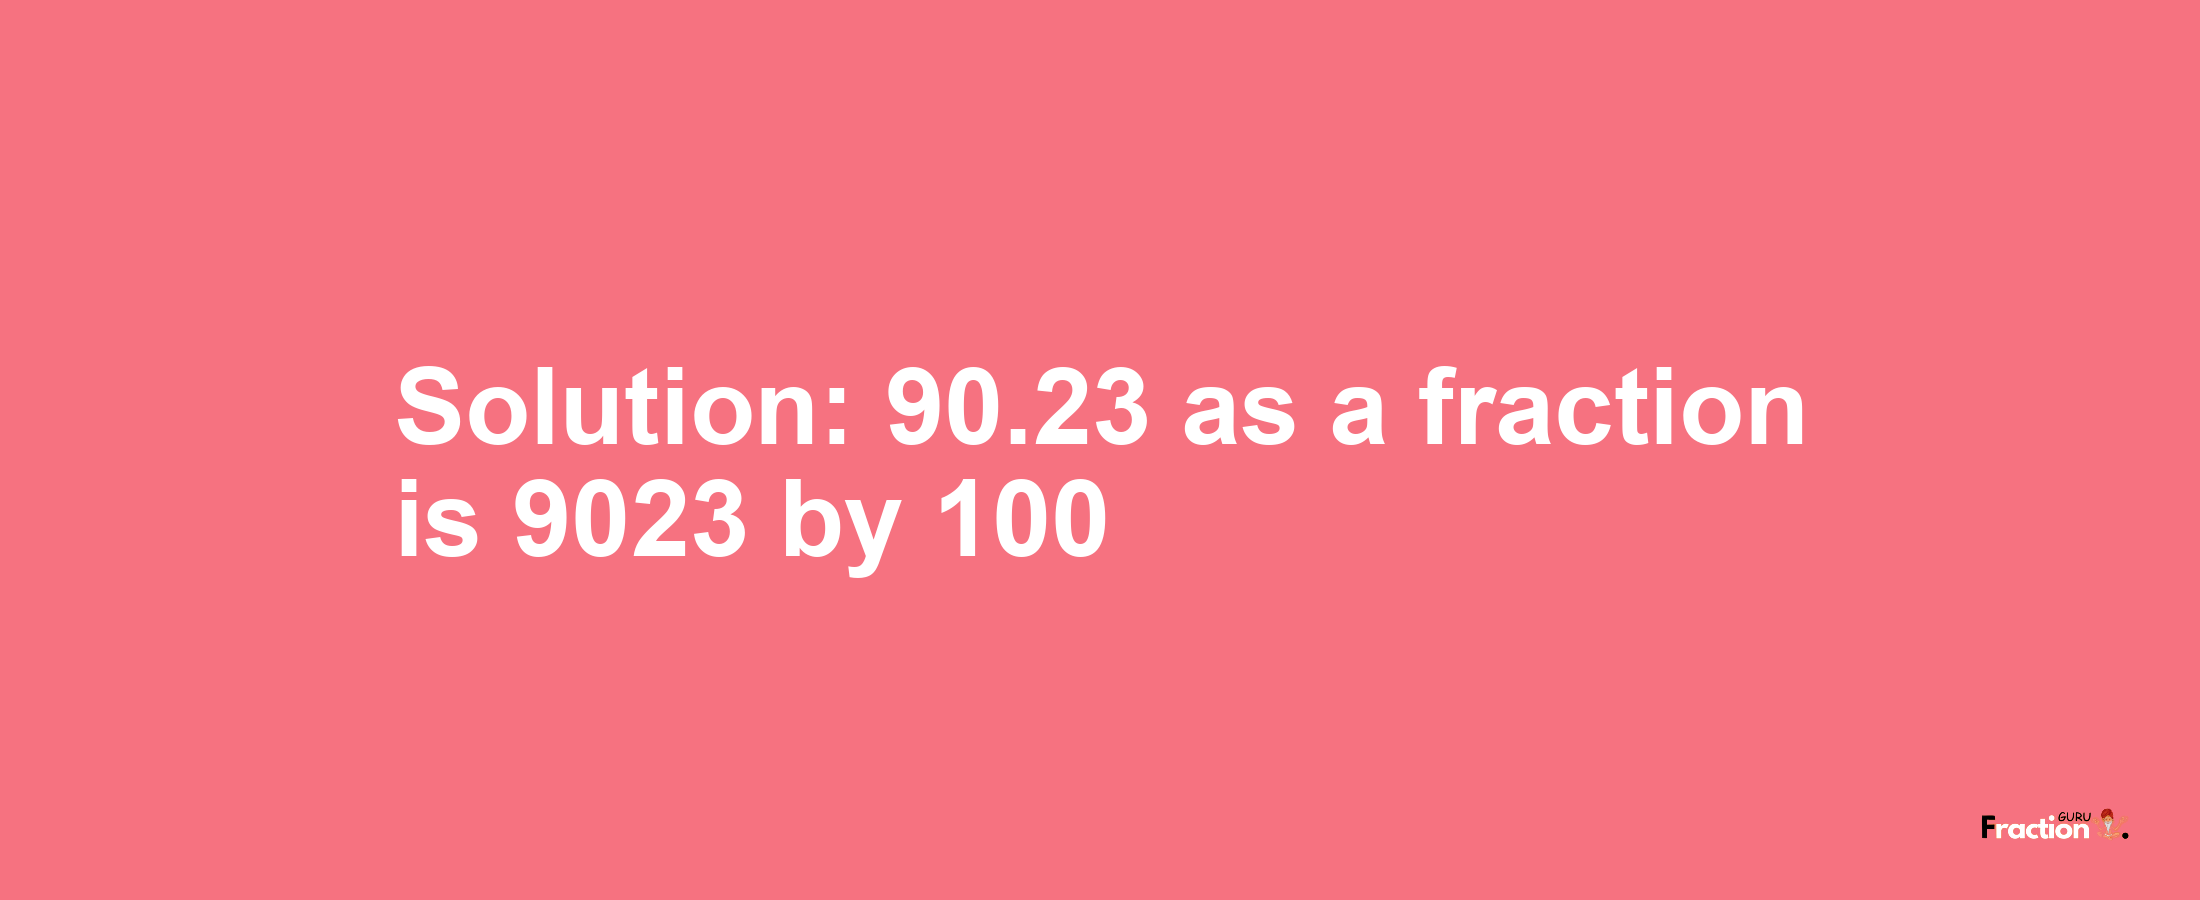 Solution:90.23 as a fraction is 9023/100